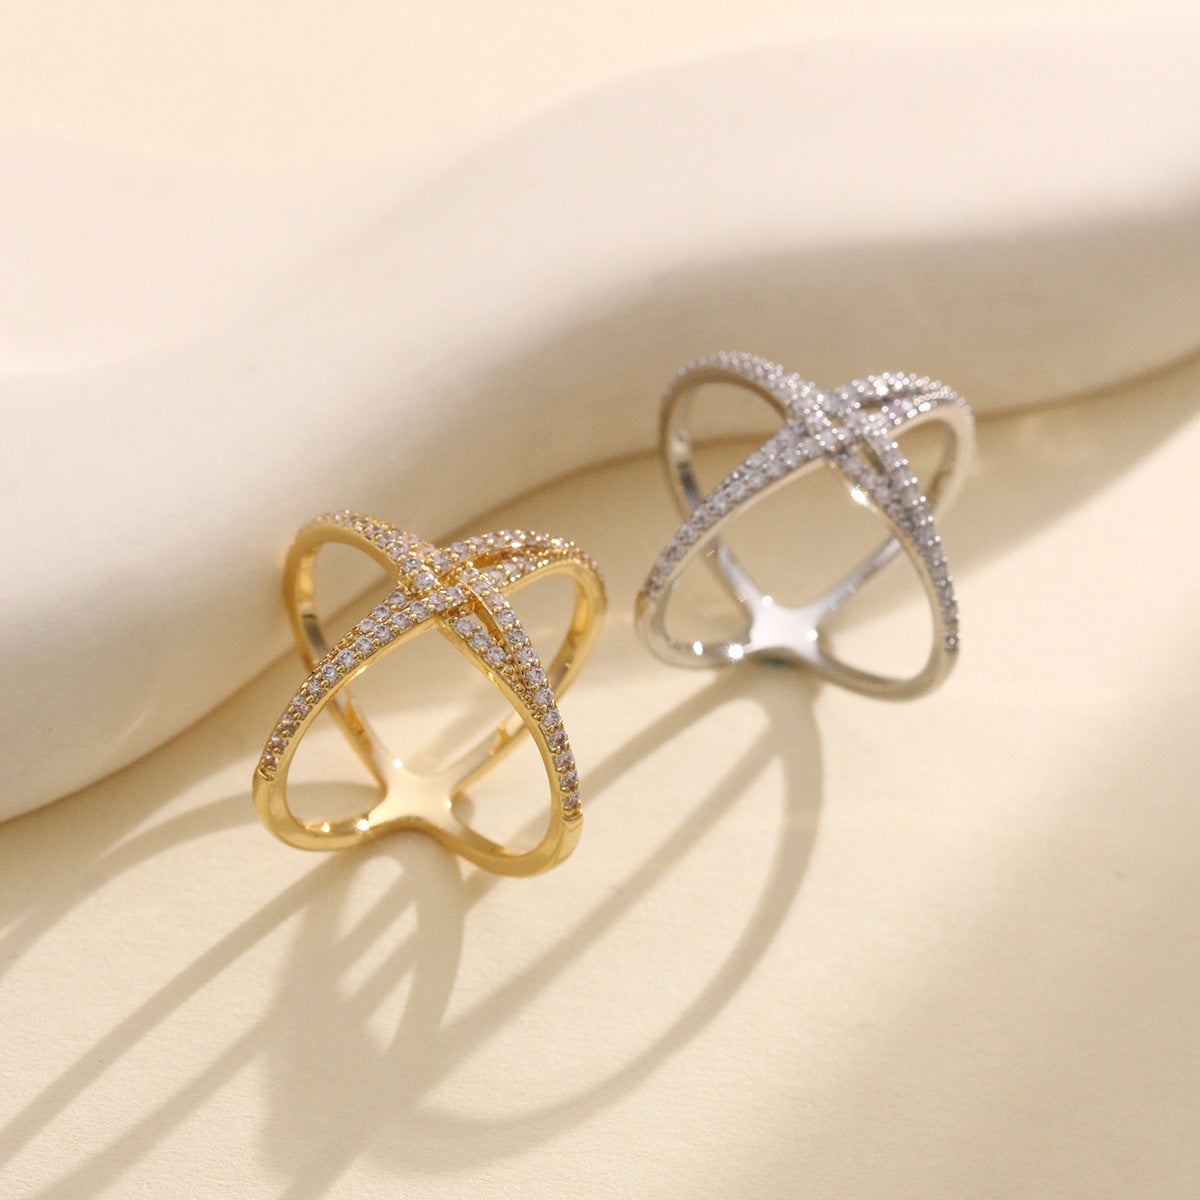 Genuine 18K gold plated Scarf rings, with AAA Zicron